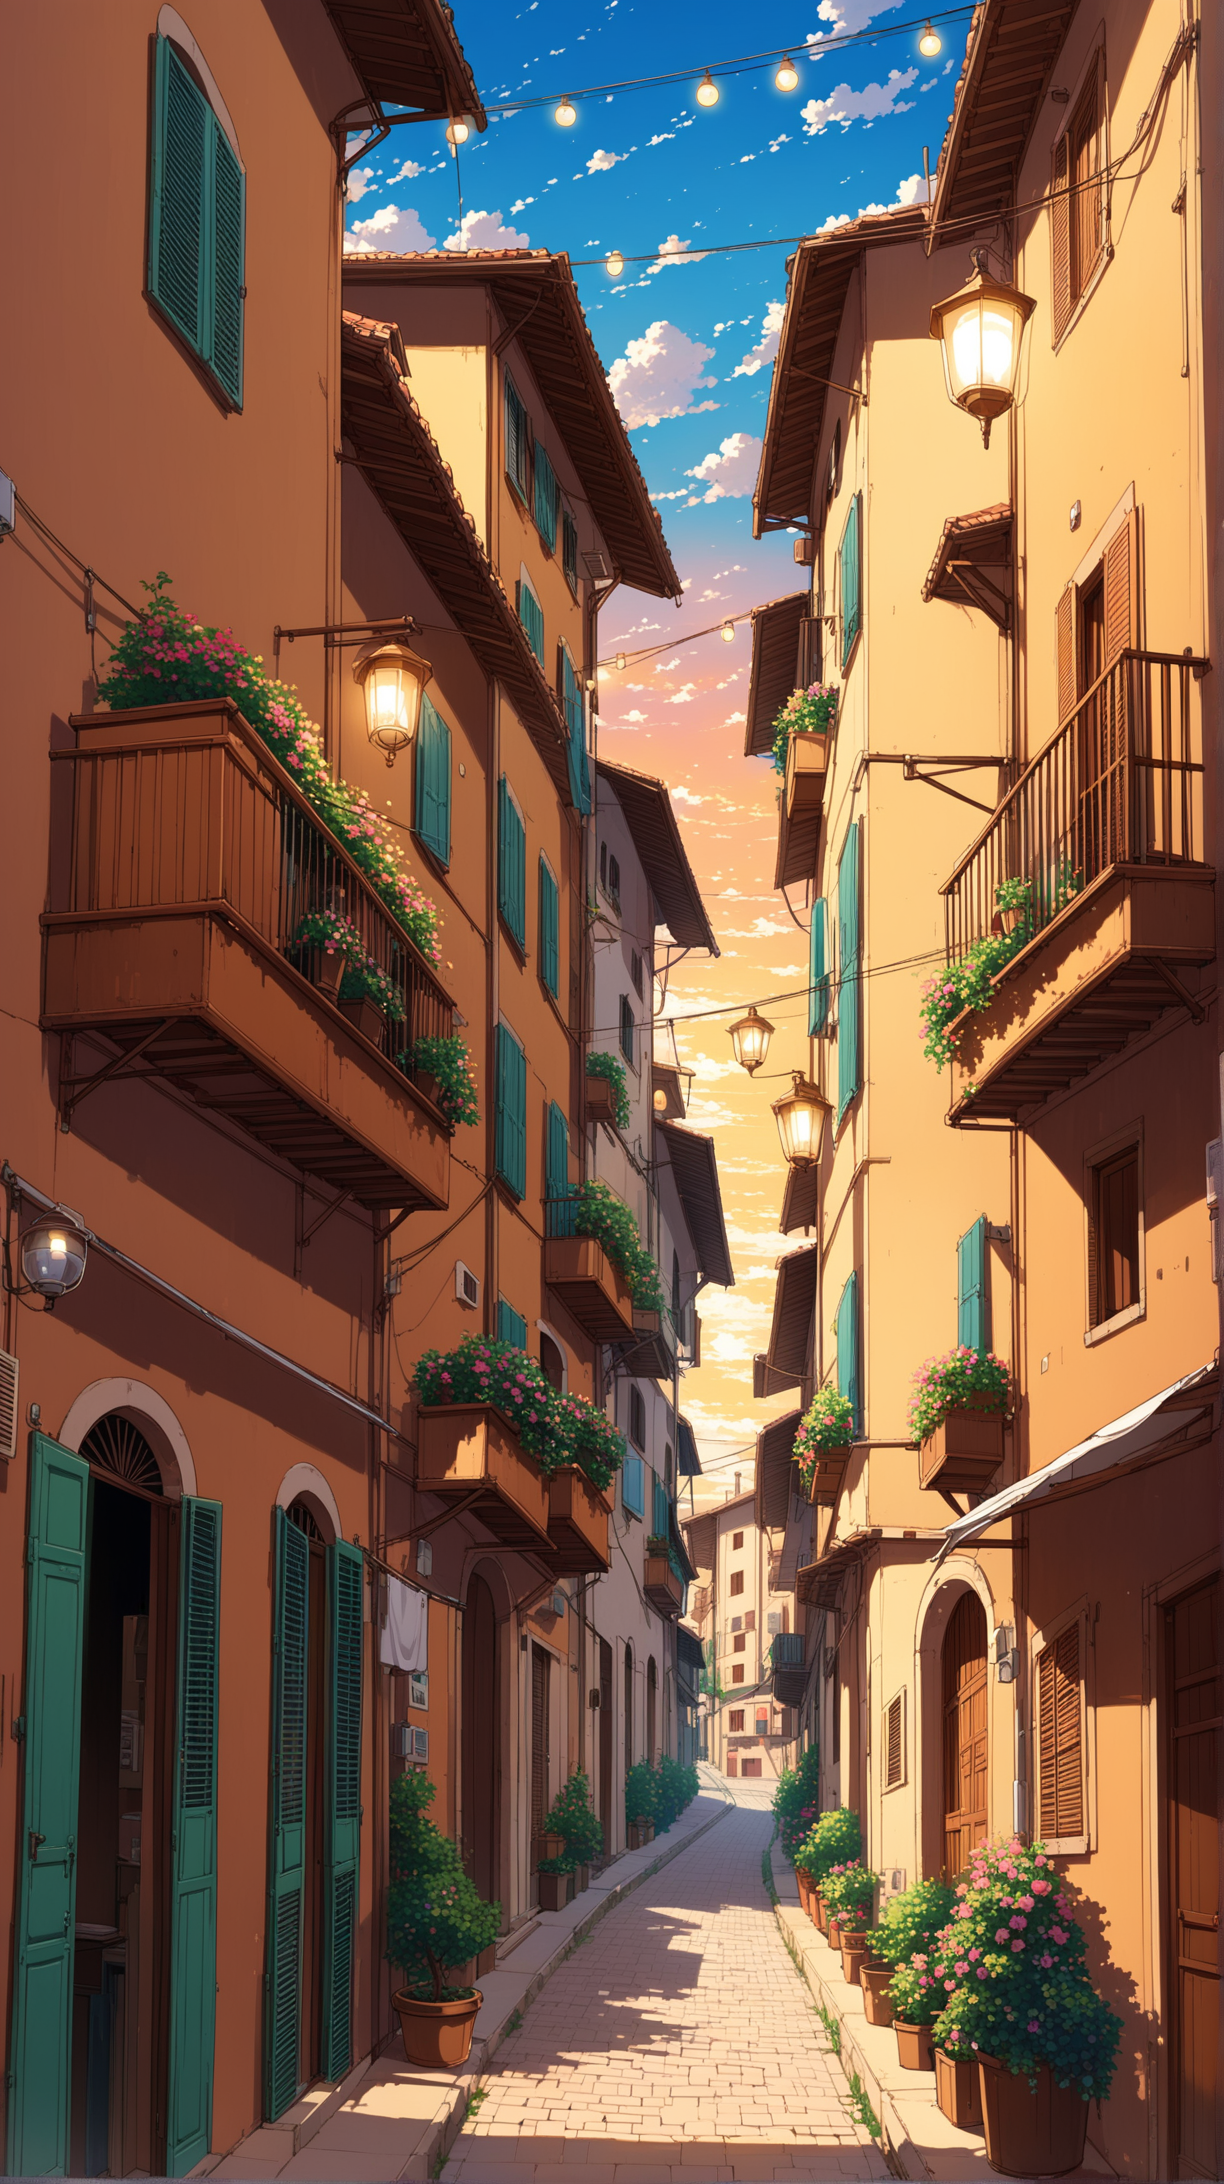 The balconies with many of hanging  clothes laundry on each balcony at the apartment building in sleezy neghbourhood in a small village in Italy, lampion  snd lamps, many people walking, shops in alley,  ,flowers potted, beautiful evening summer sky, anime, ghibli studio style, trending pixiv fansbox, acrylic palette colors, ultra highly detailed form and line, wire and pole, codex_401 art style, amazing ilustration anime